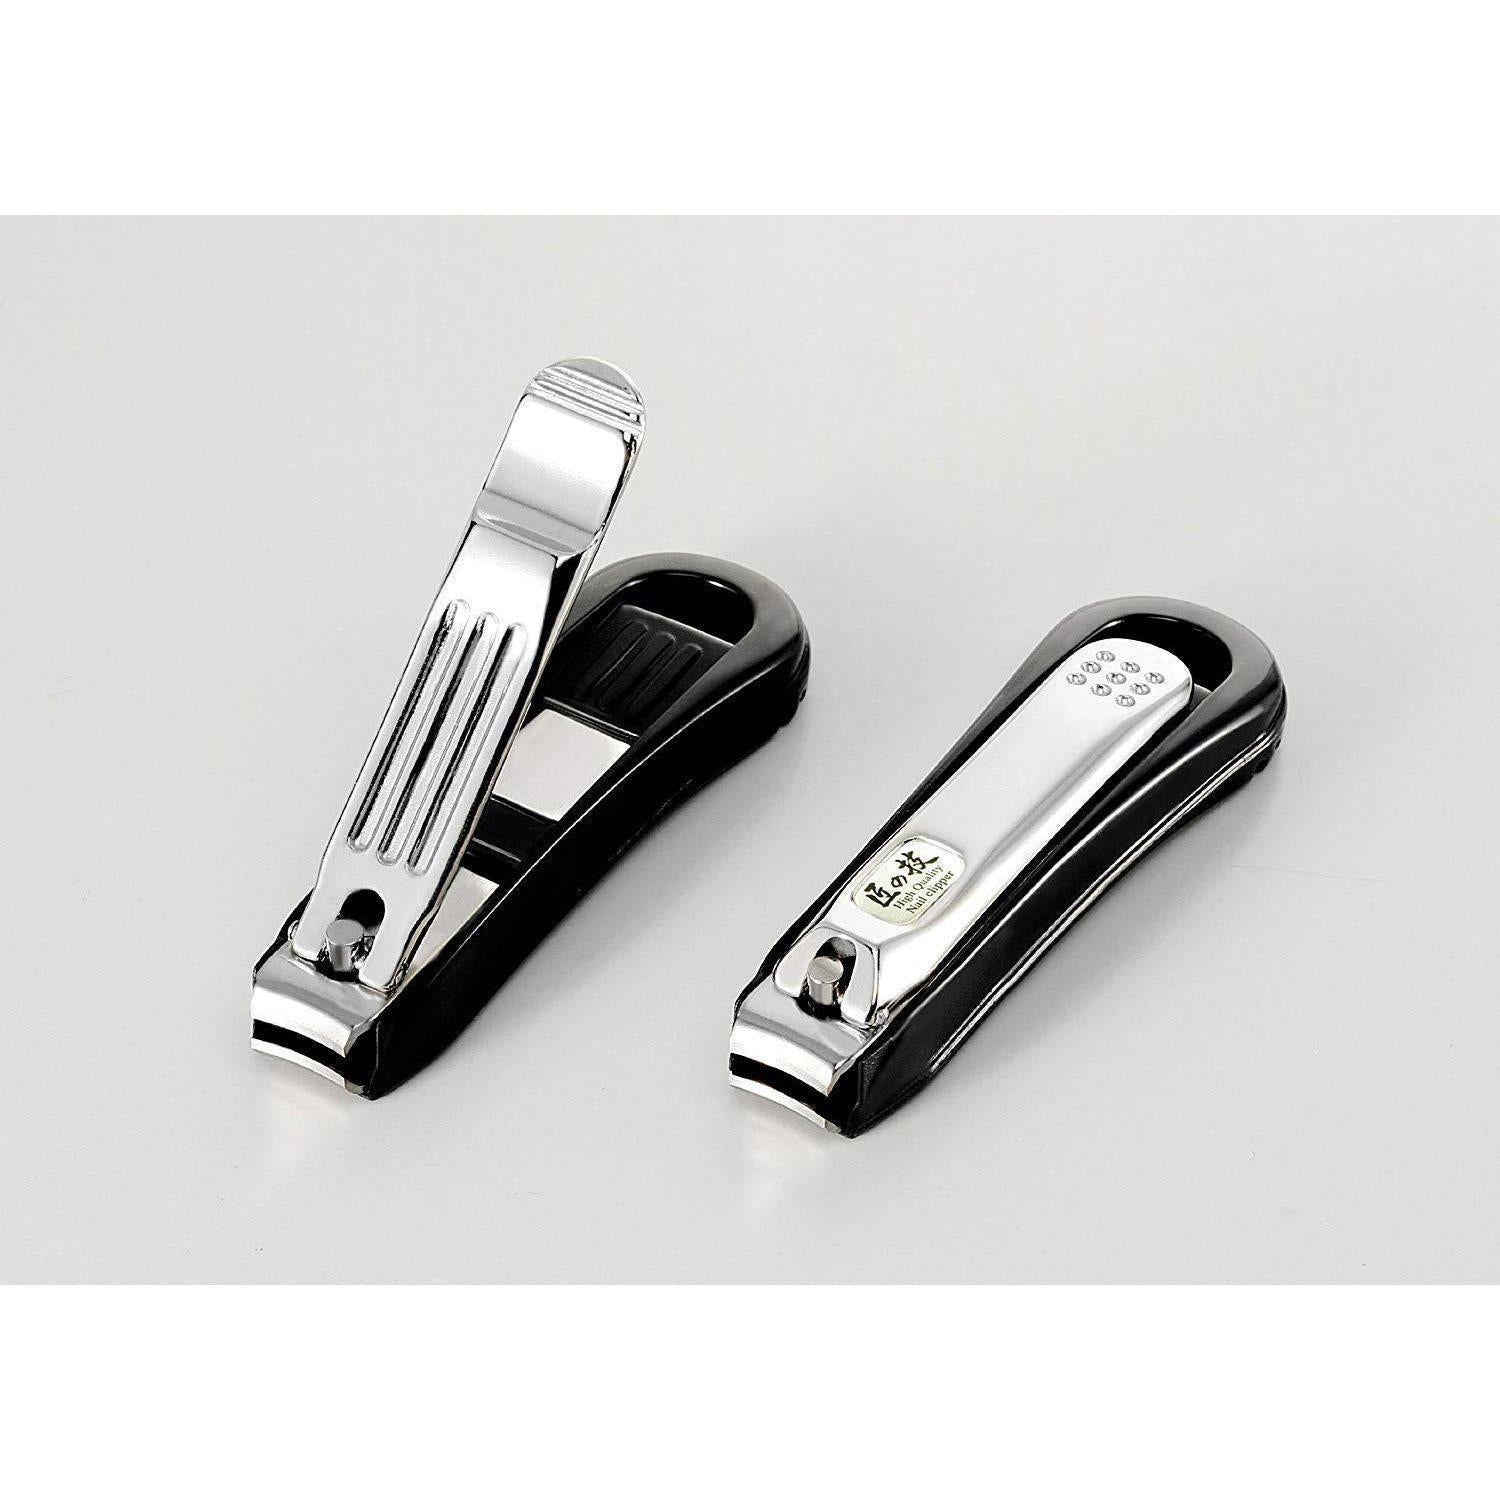 Bulk purchase G-1205 Takumi's skill Stainless steel high-class nail clippers  x 4